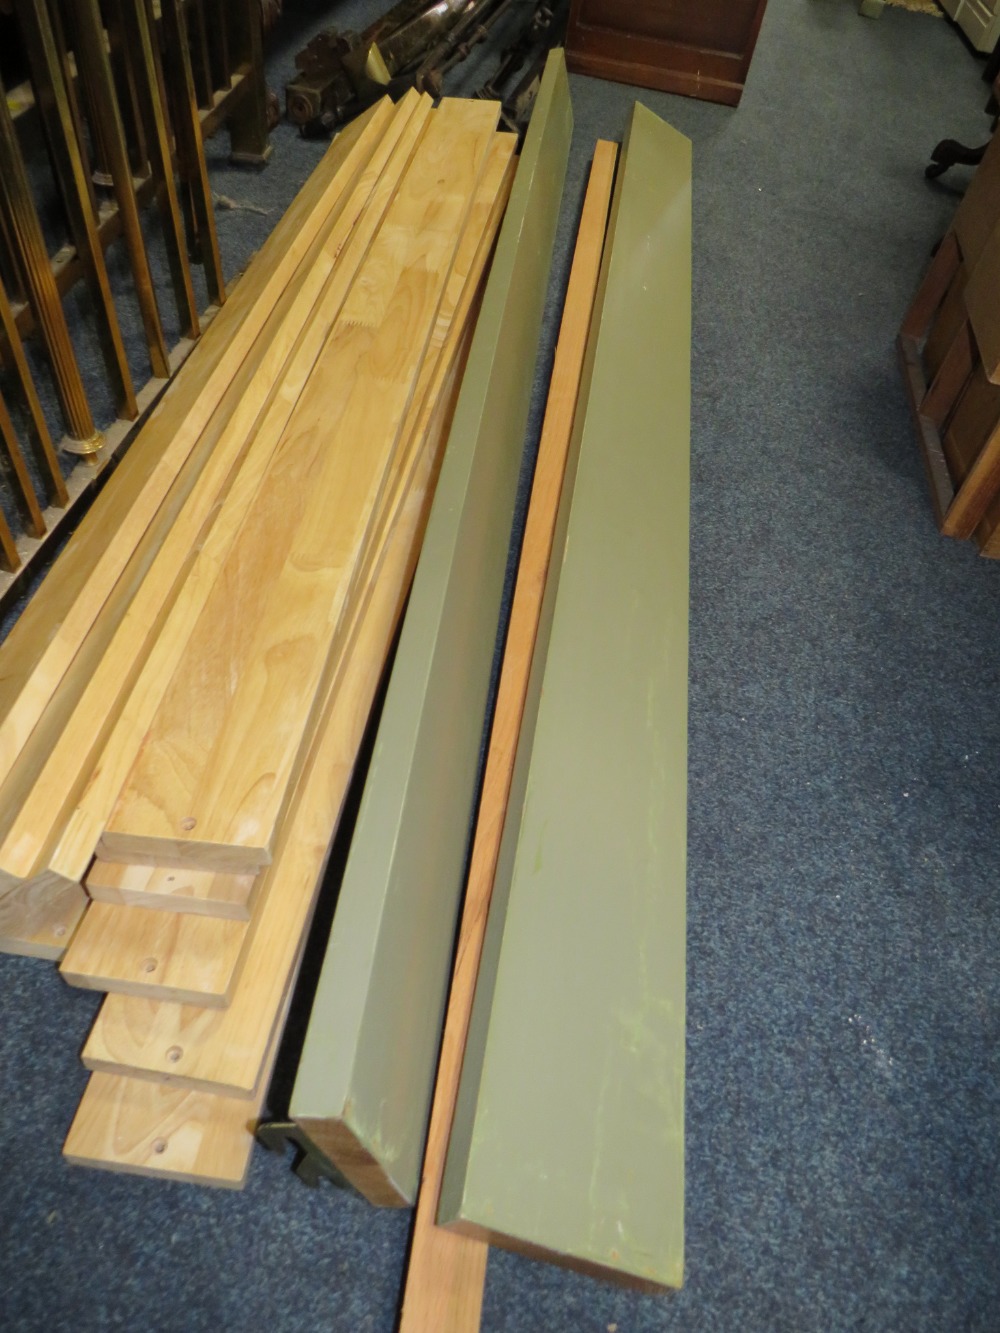 A MODERN OAK AND GREEN PAINTED KING SIZE BED FRAME - Image 8 of 8